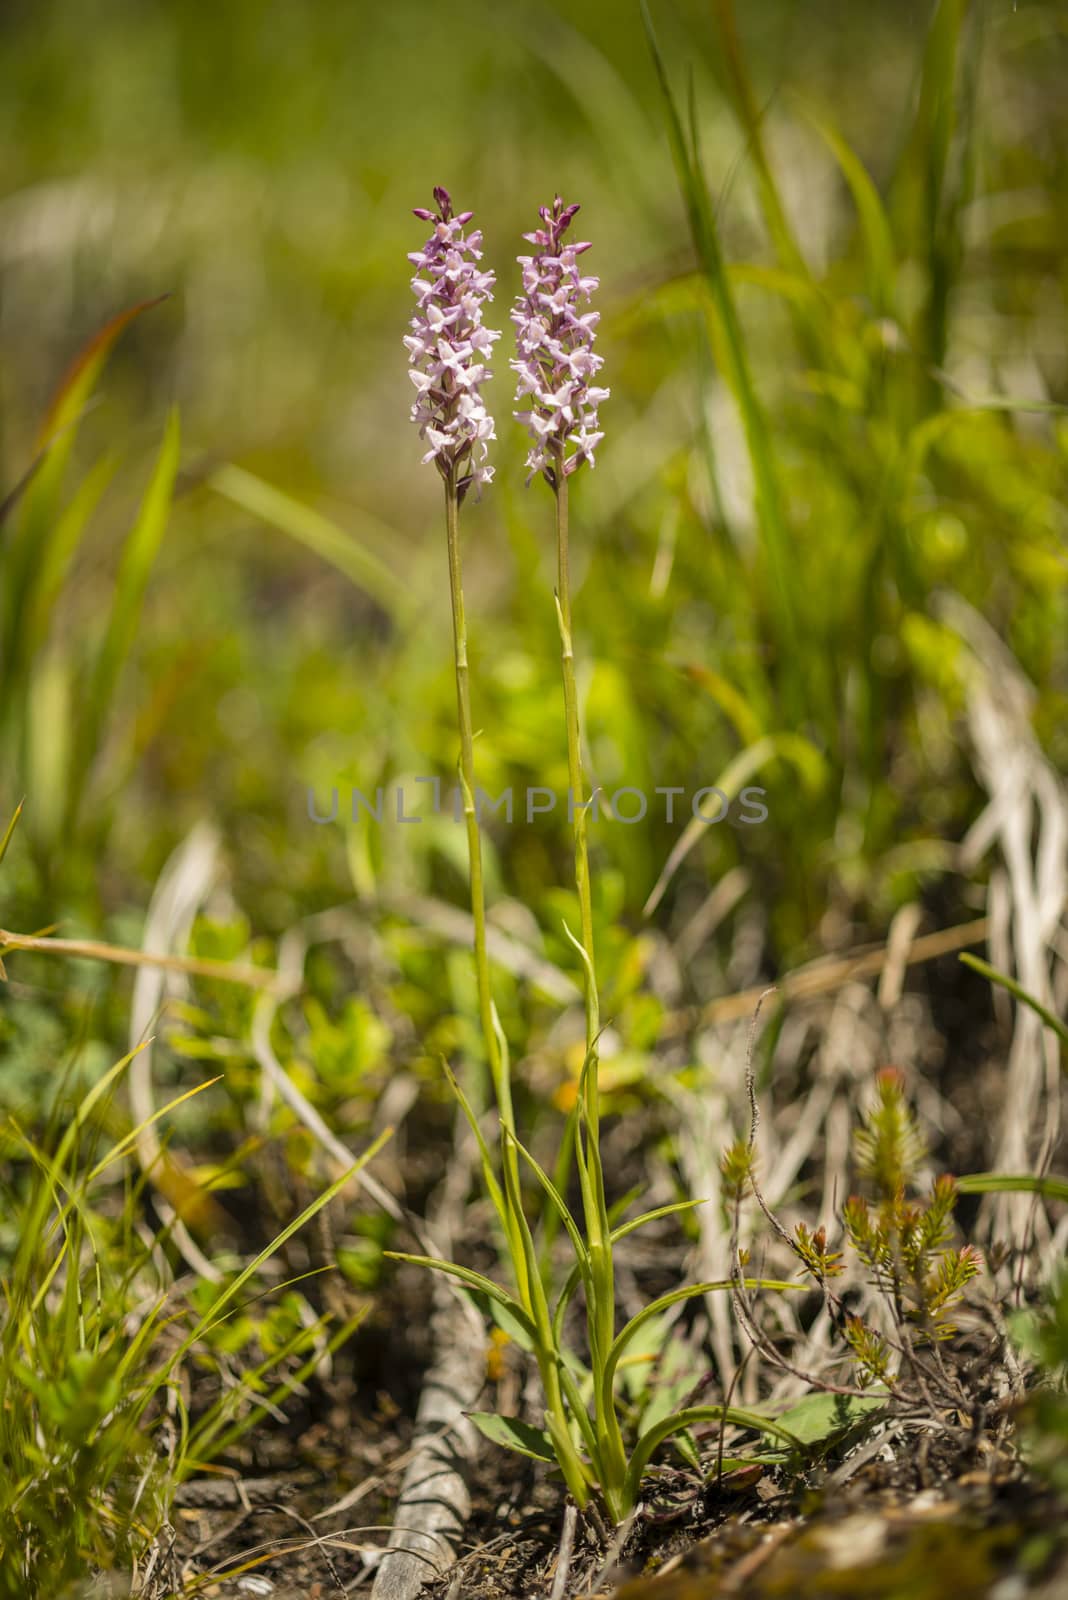 Wild orchid of the Alps mountains by AlessandroZocc